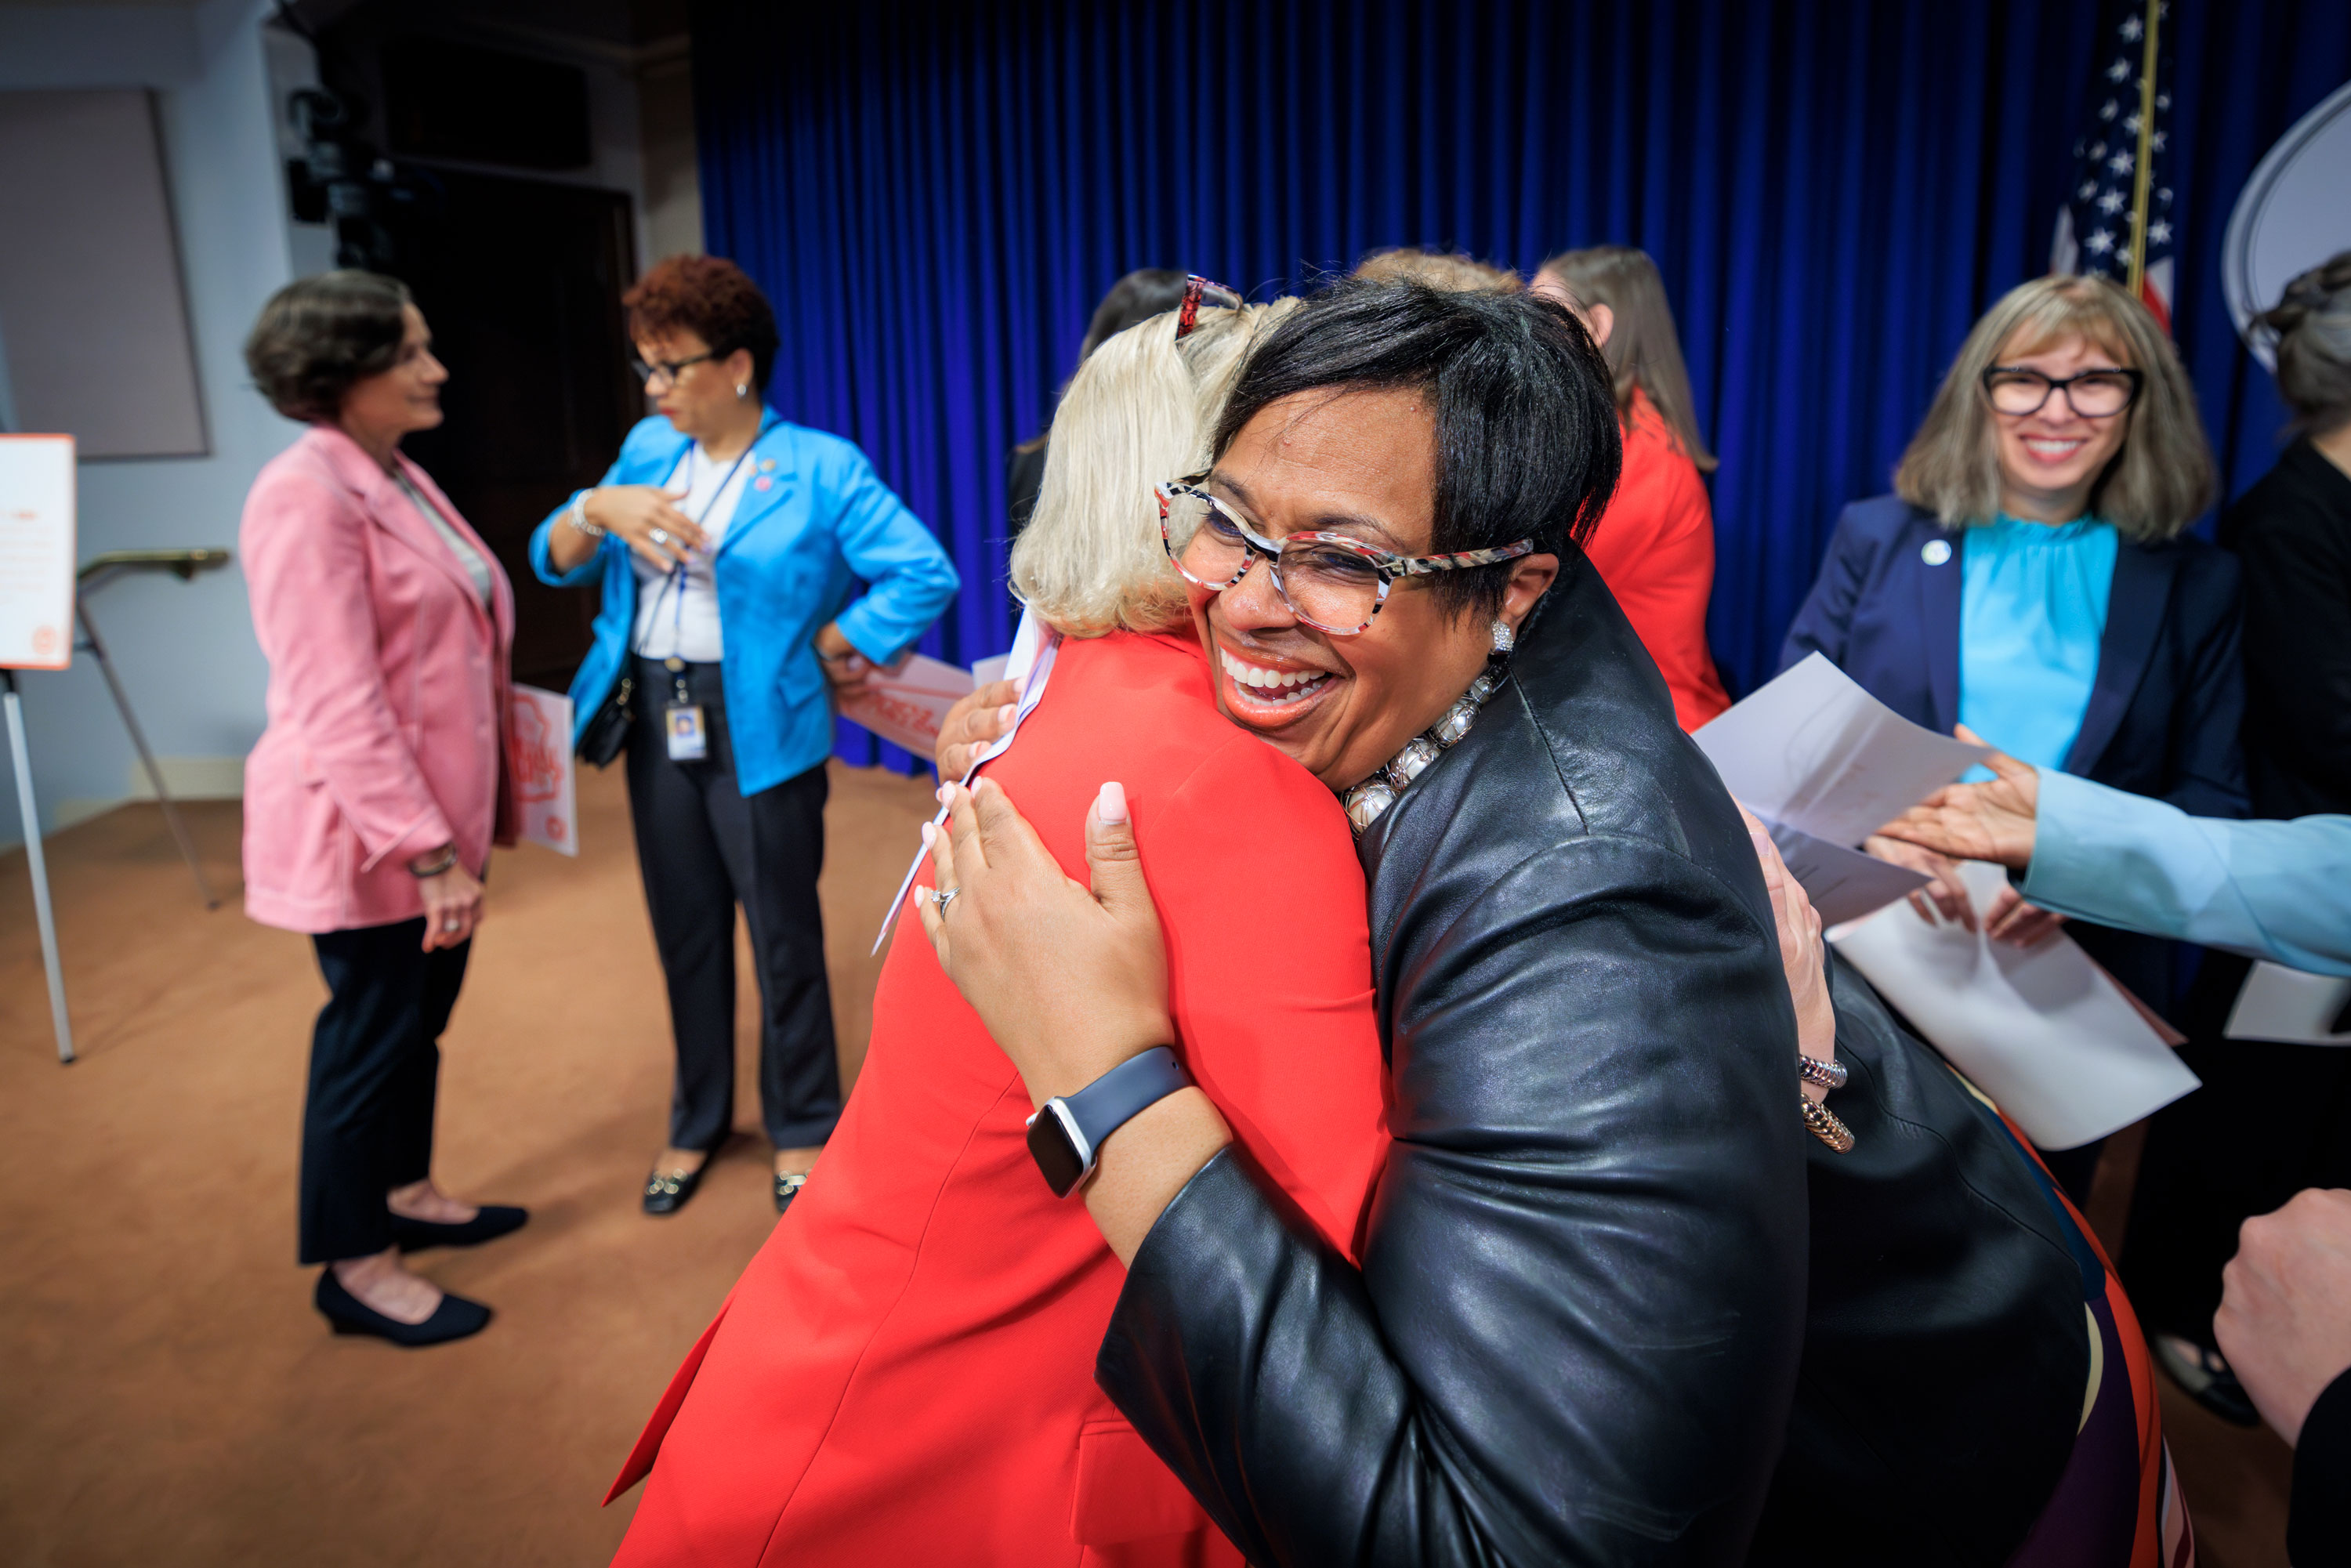 State Rep. Darisha Parker embraces a woman during an event.